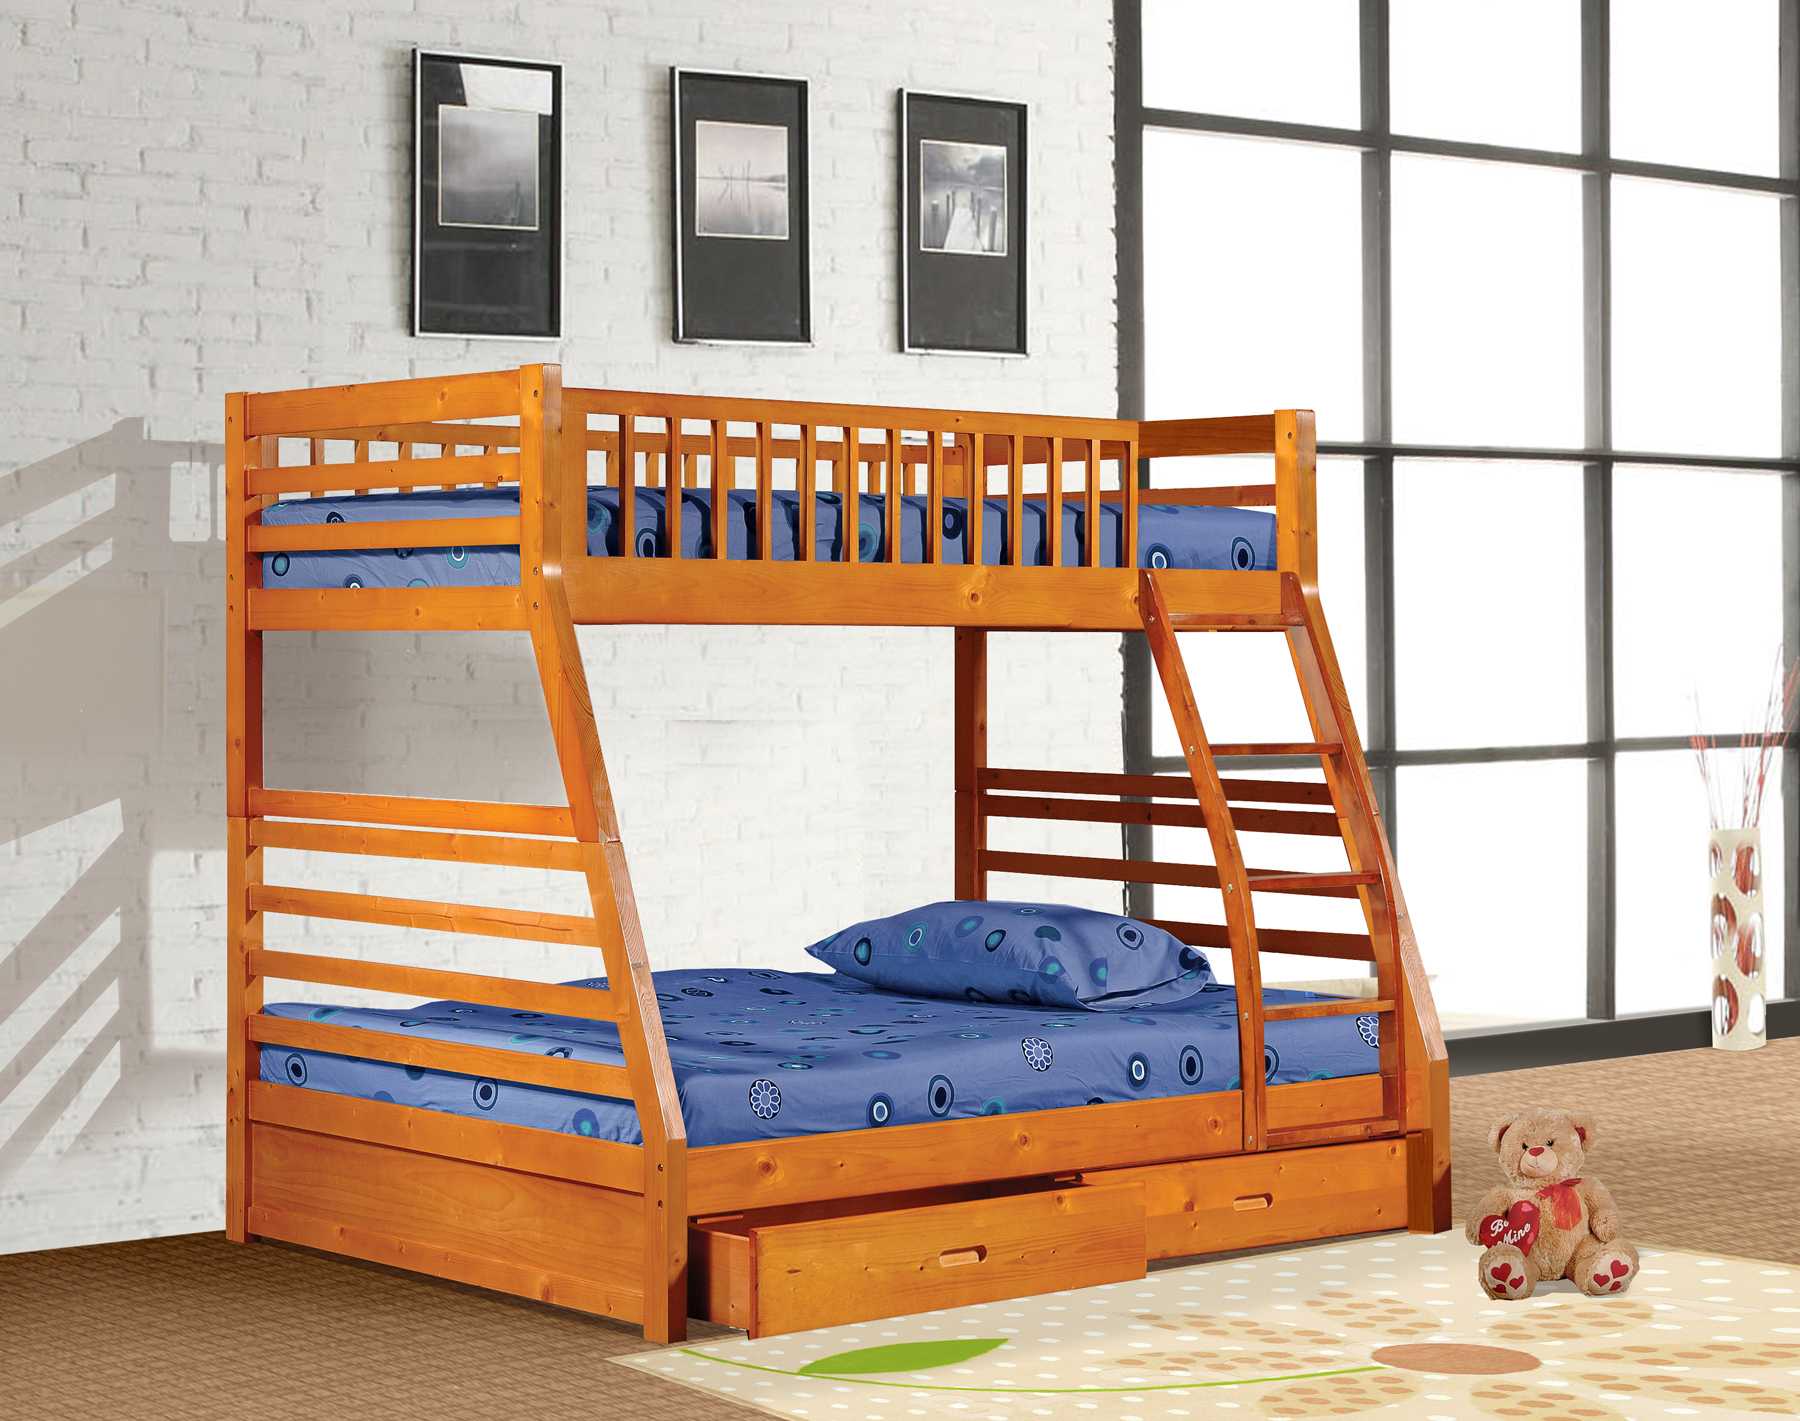 78.75" X 42.5-57.25" X 65" Oak Manufactured Wood and Solid Wood Twin or Full Bunk Bed with 2 Drawers